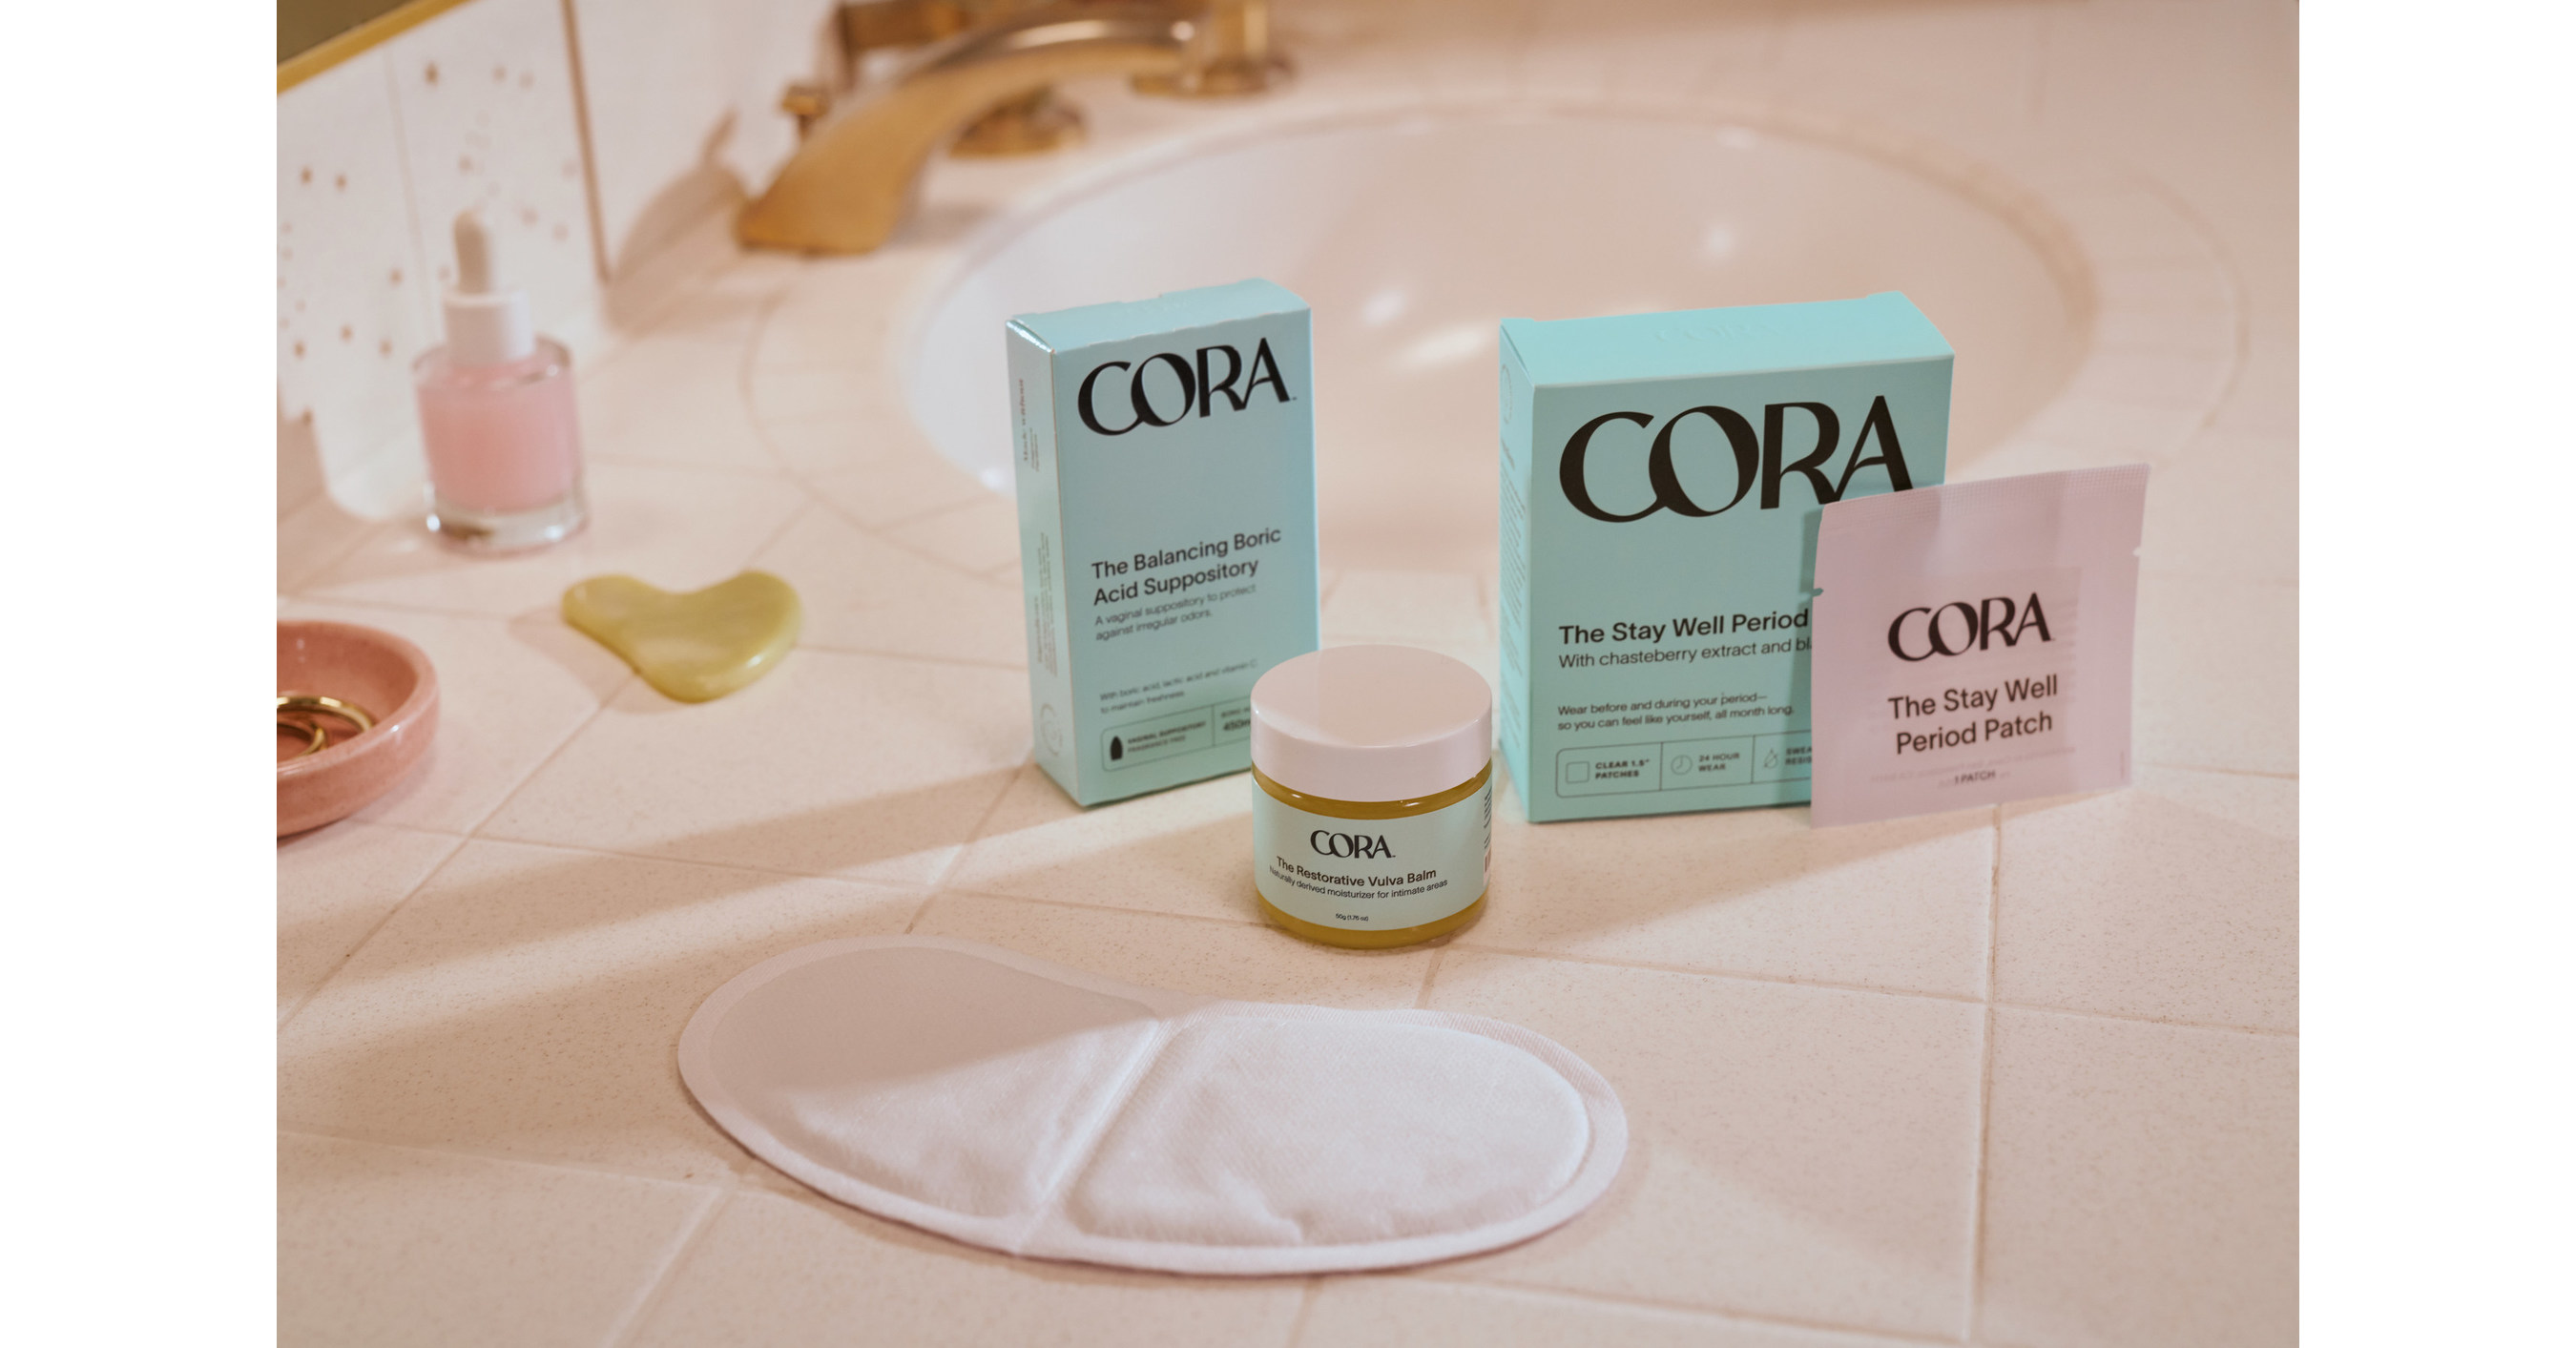 Cora® Reimagines Period Care with a New Beauty-Inspired Look and